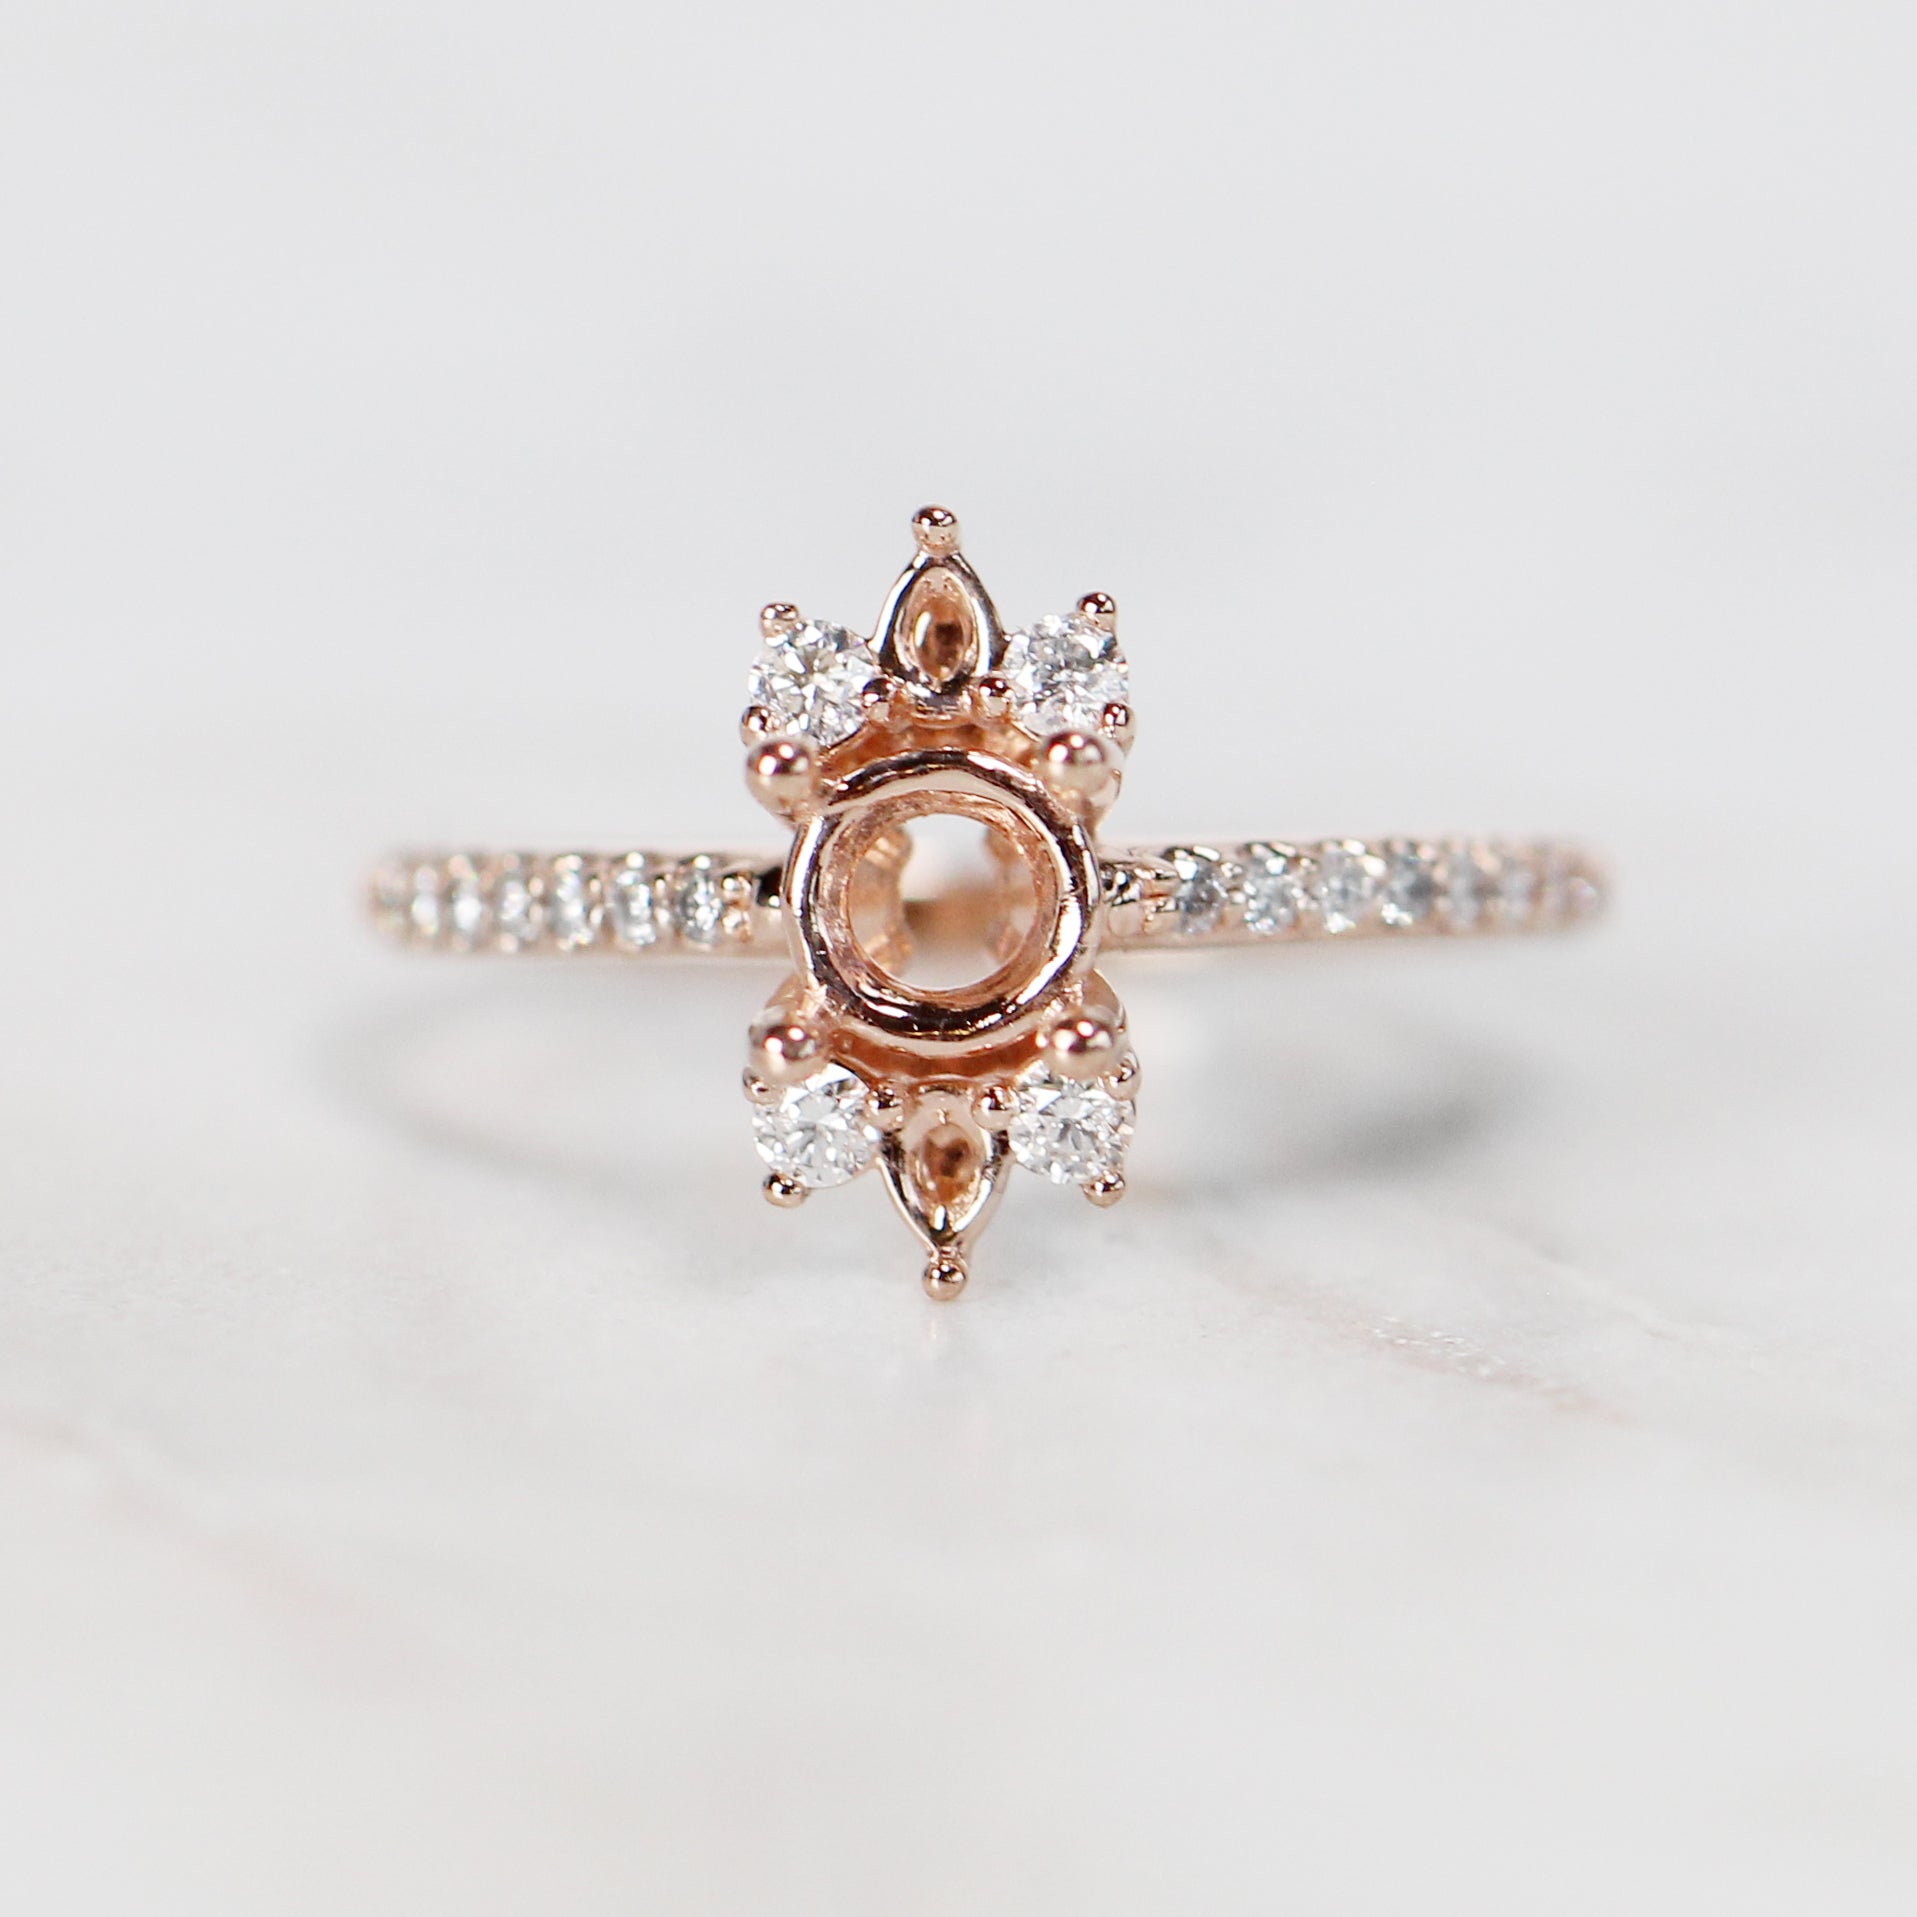 Cora Setting - Midwinter Co. Alternative Bridal Rings and Modern Fine Jewelry